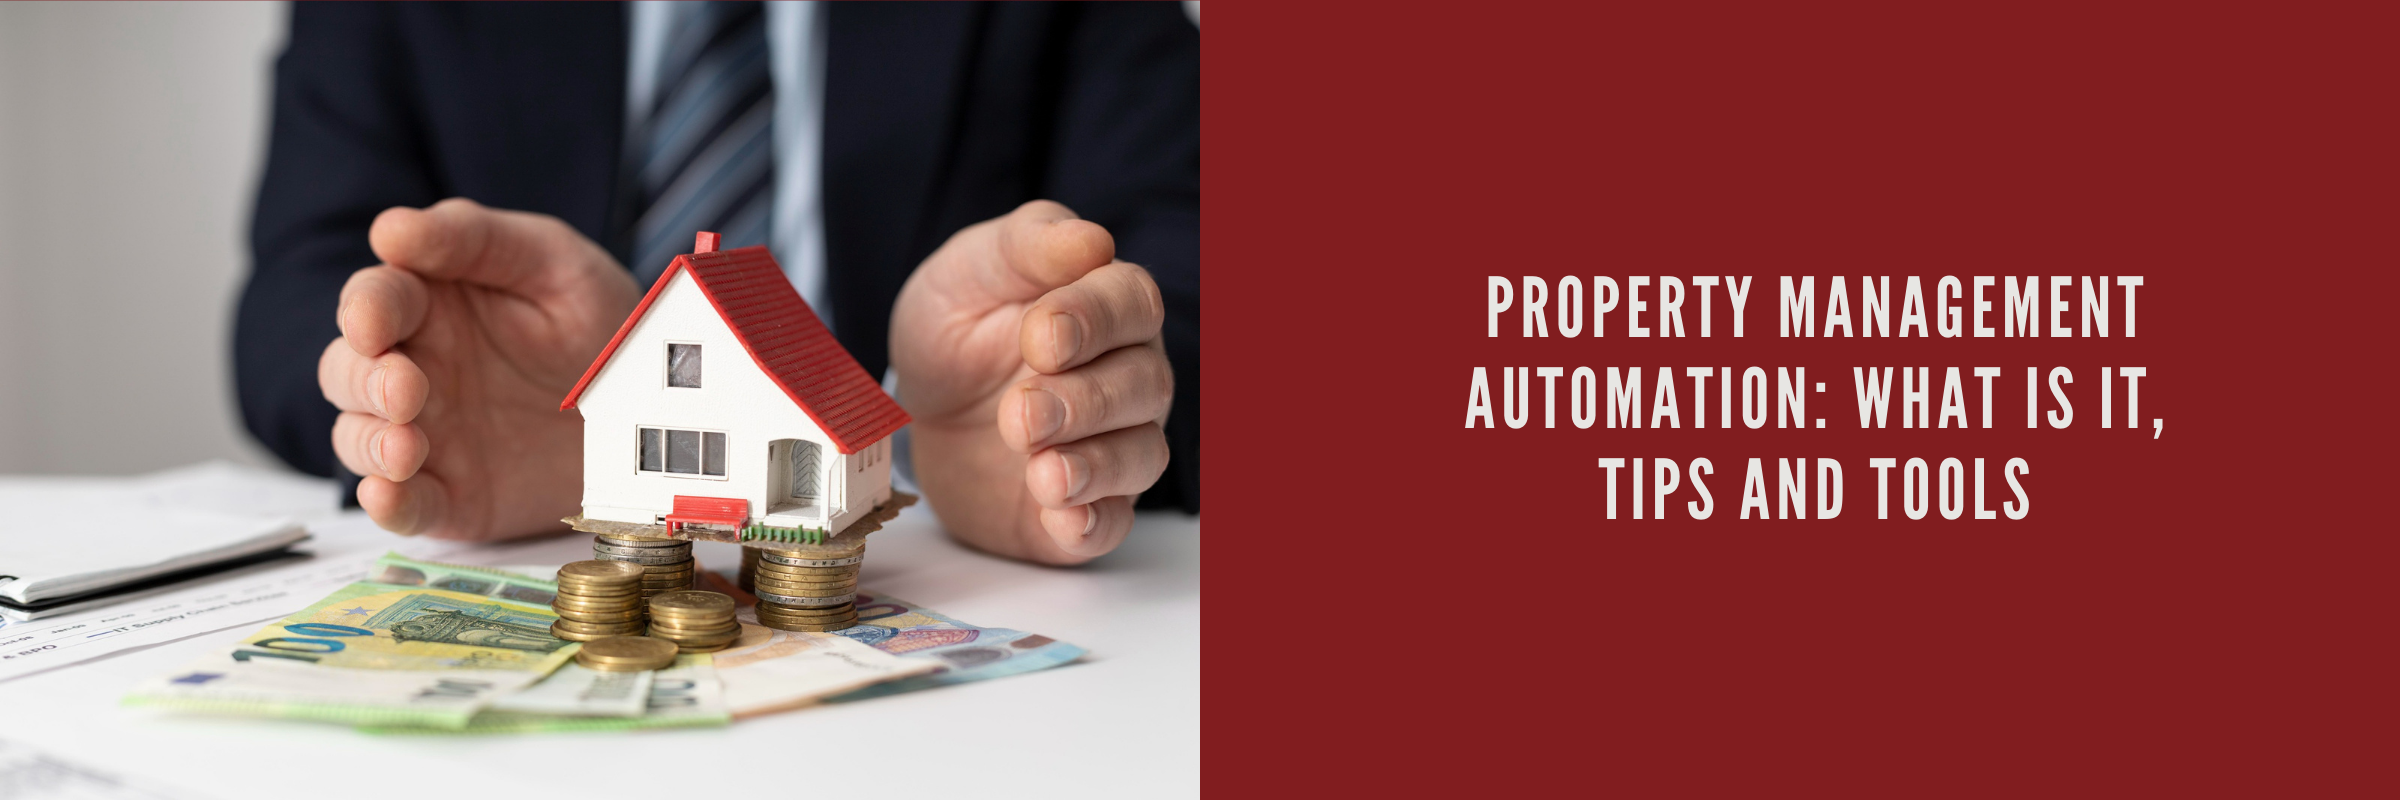 Property Management Automation: What is it, Tips and Tools